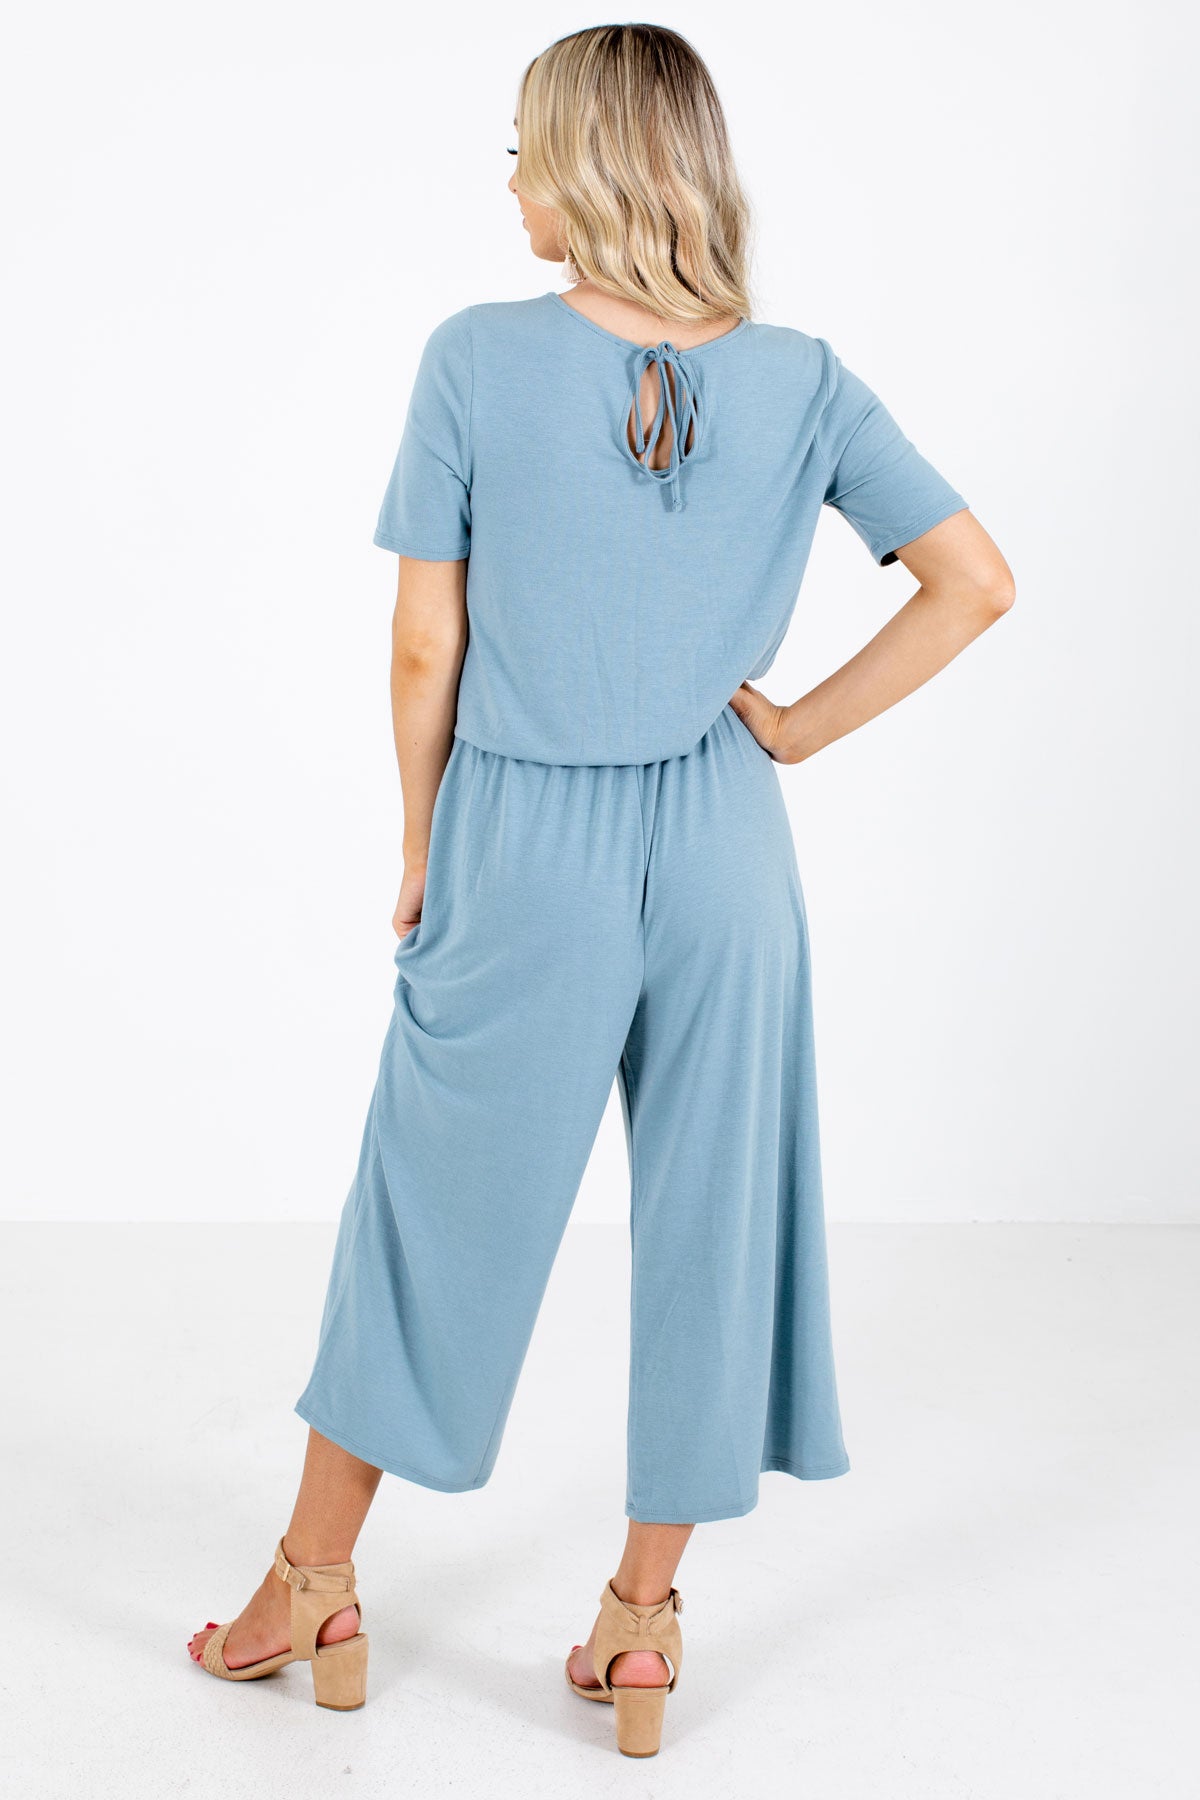 Blue Cute and Comfortable Boutique Jumpsuits for Women